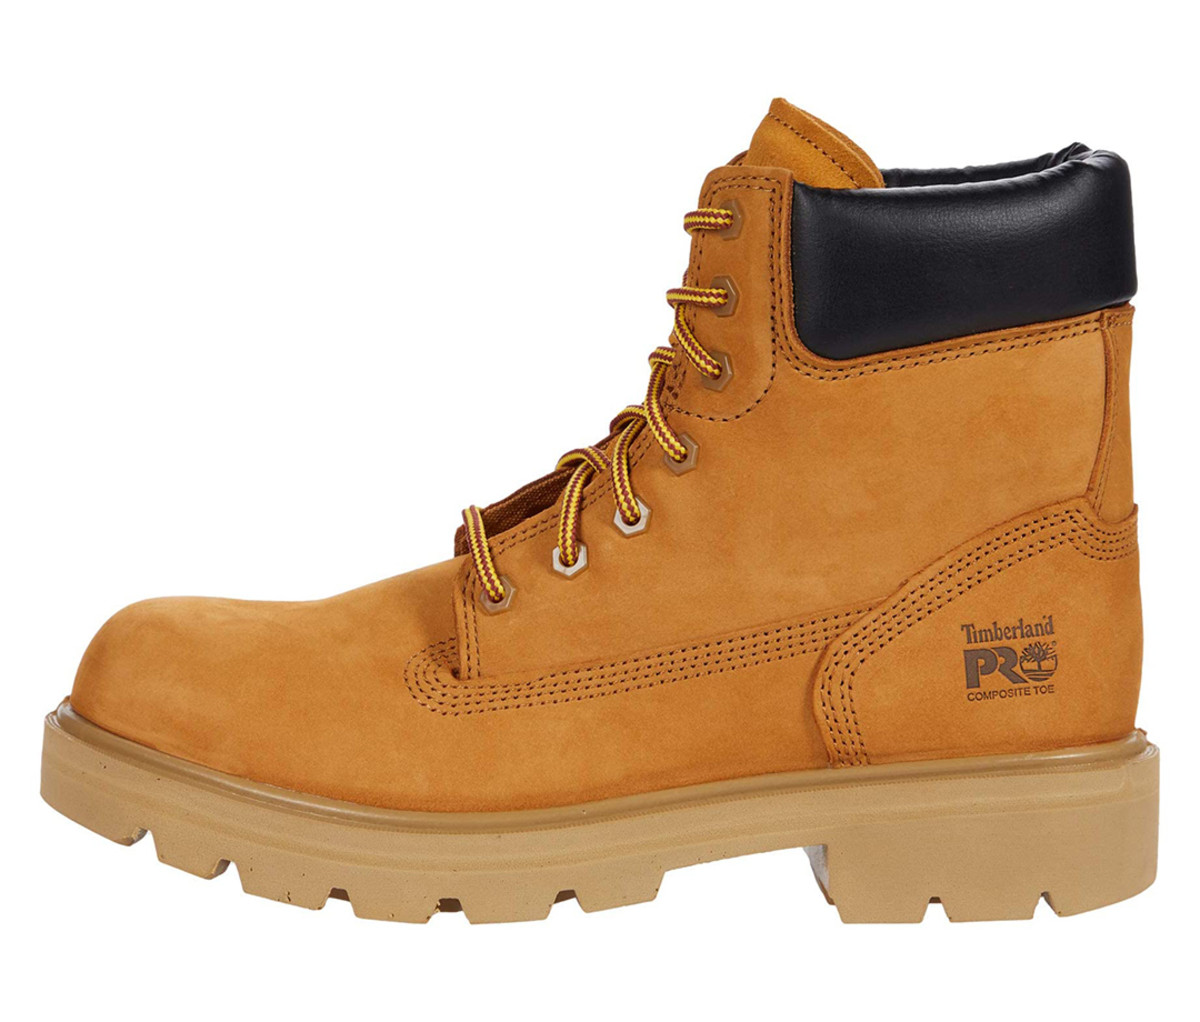 Go About Your Work Day in Comfort With These Timberland PRO Boots